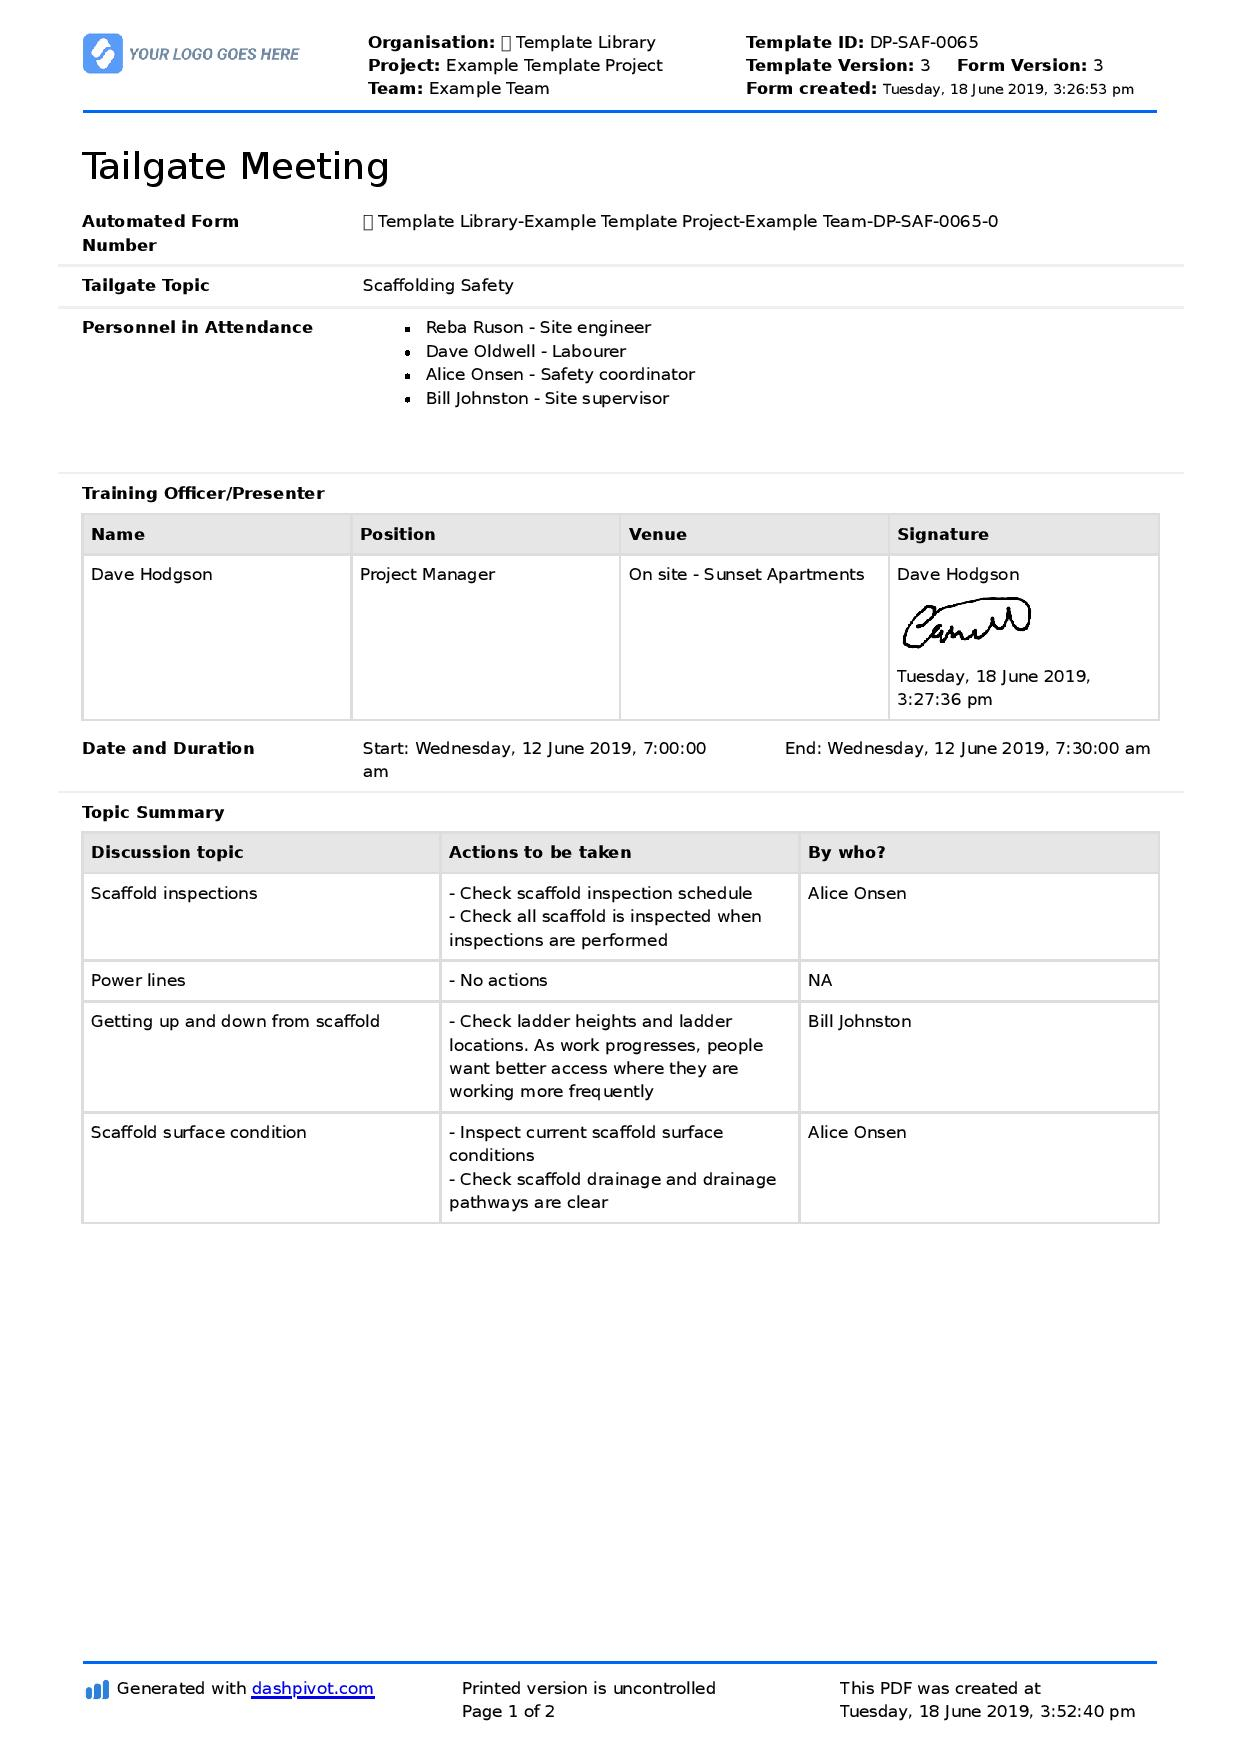 Tailgate Meeting Form Template Free To Use And Customise in dimensions 1239 X 1754